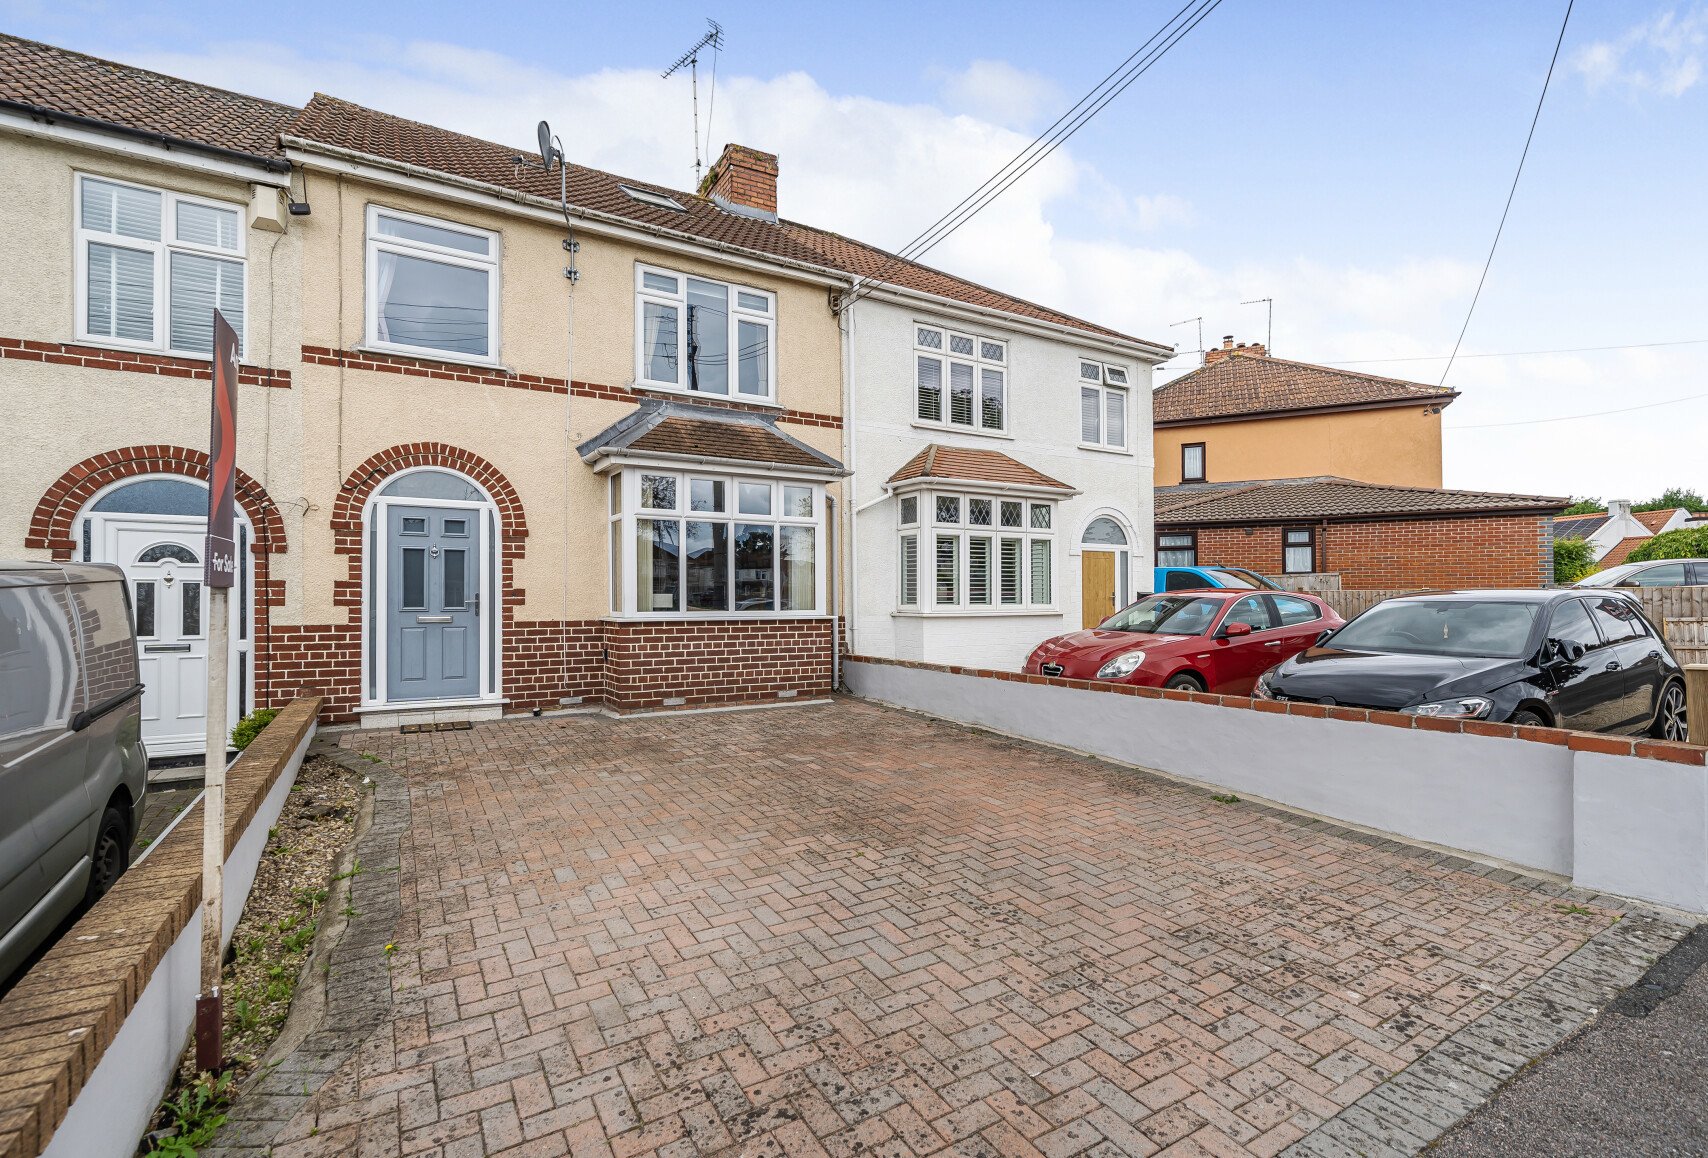 Station Road, Kingswood, Bristol, South Gloucestershire, BS15